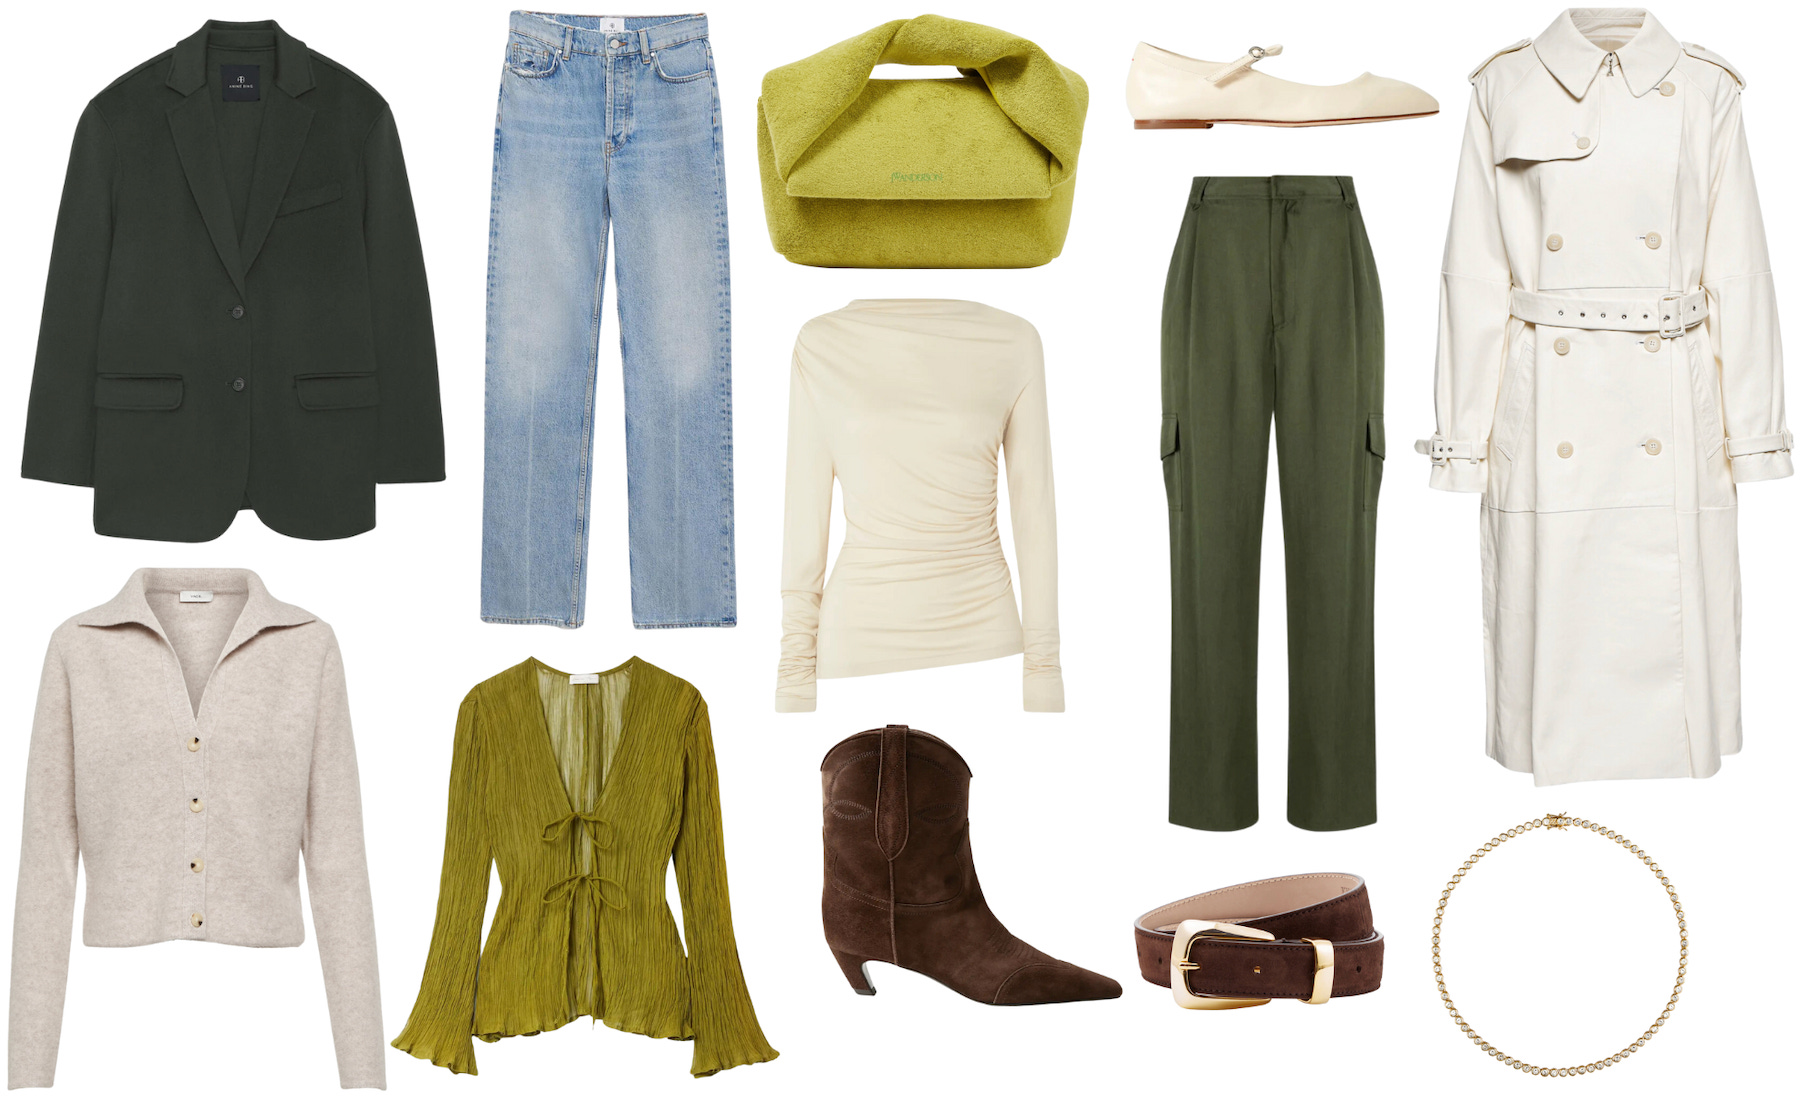 12 Capsule Wardrobe Essentials You Need for Endless Outfits – EMILIA  OHRTMANN